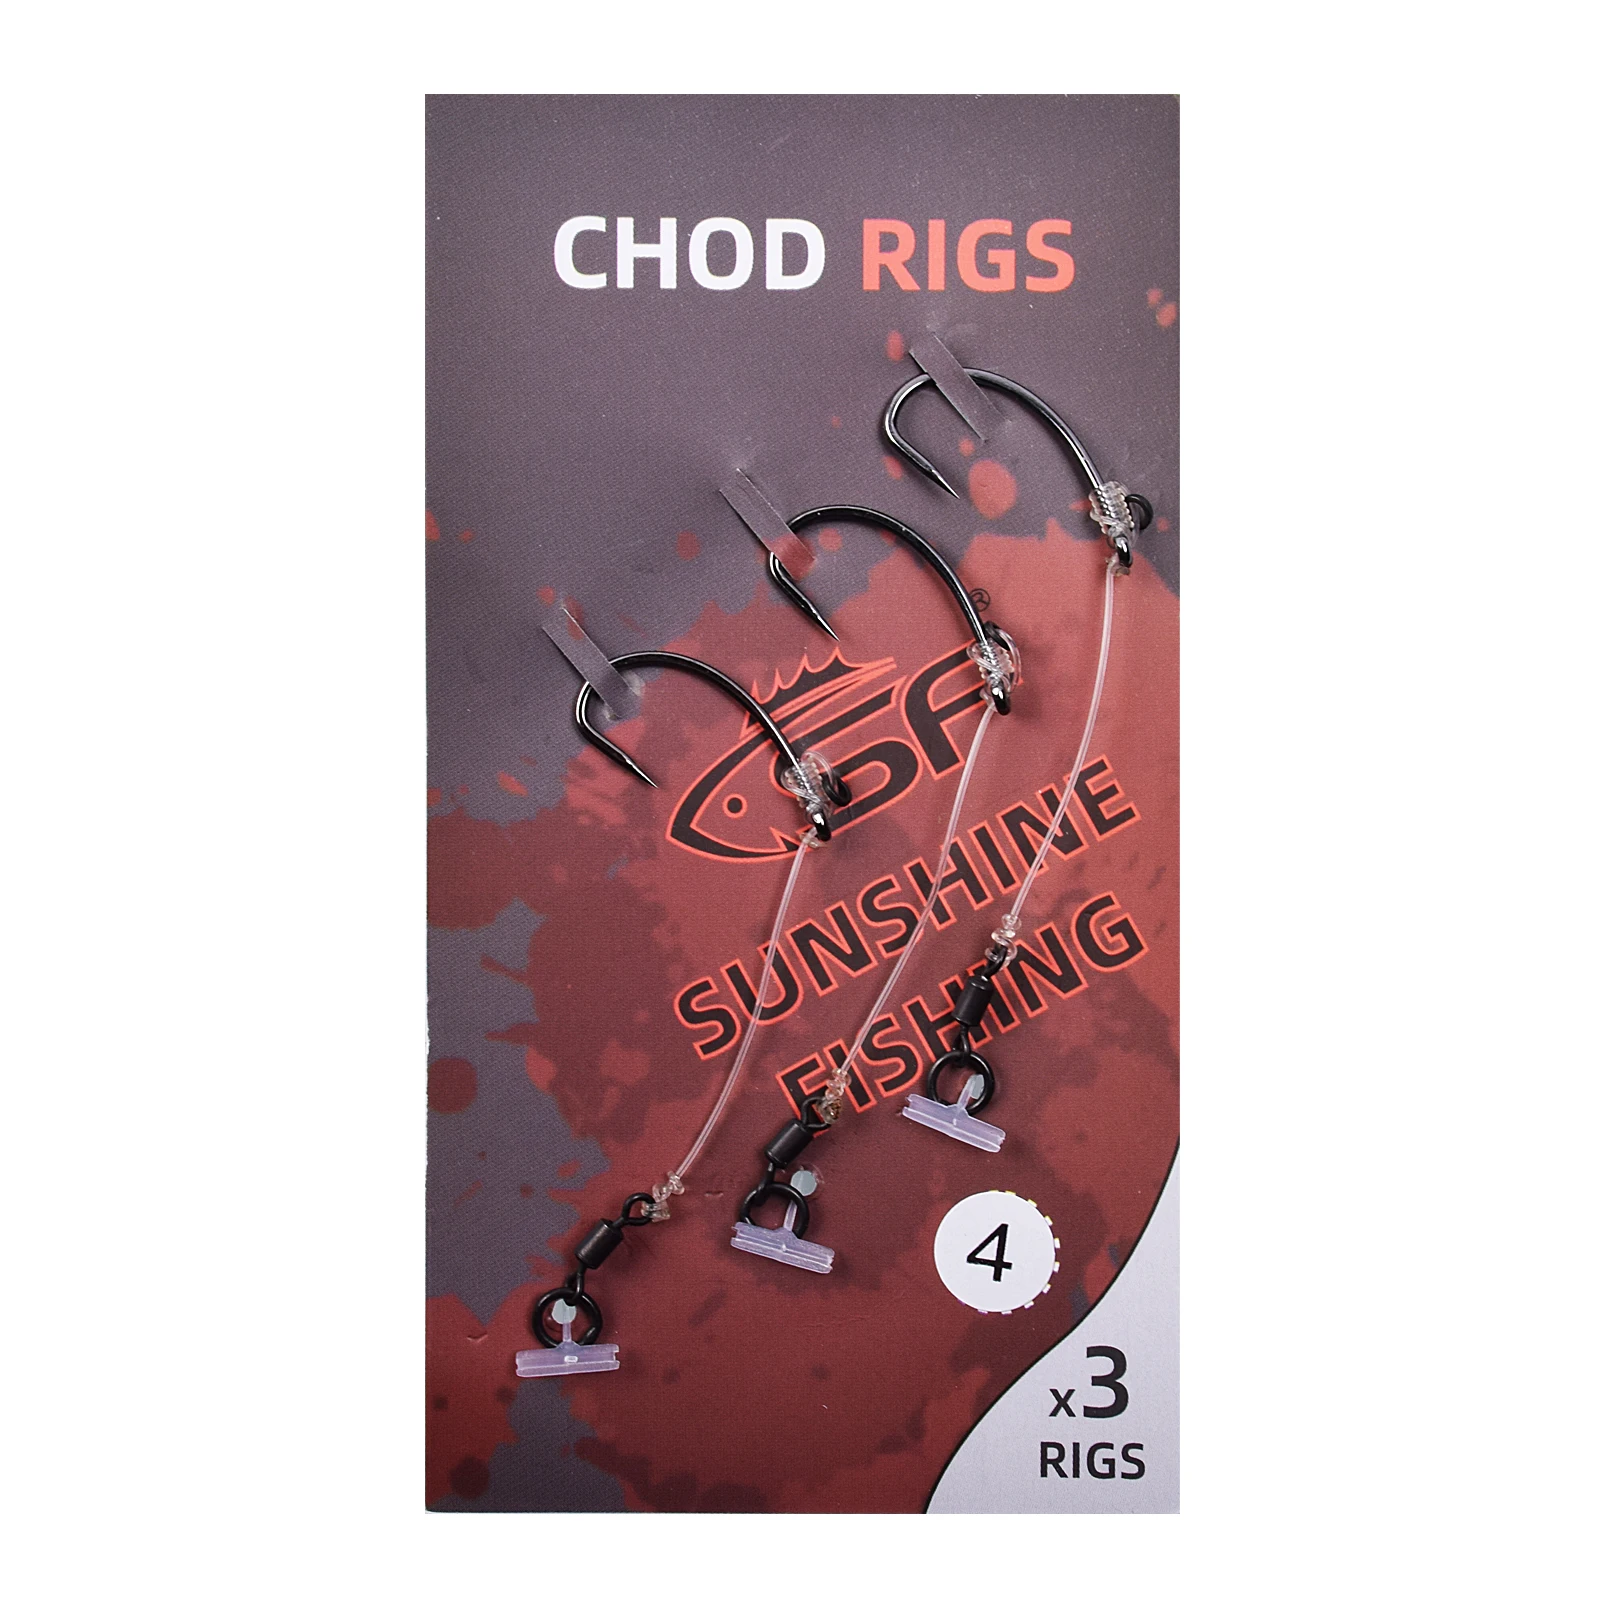 https://ae01.alicdn.com/kf/H99e0b746fd4f472dbe9781b4e3b585c6o/SF-3Pcs-Pack-Carp-Fishing-Ready-Tied-Chod-Rigs-with-Size-8-Ring-Swivel-Long-Barbed.jpg